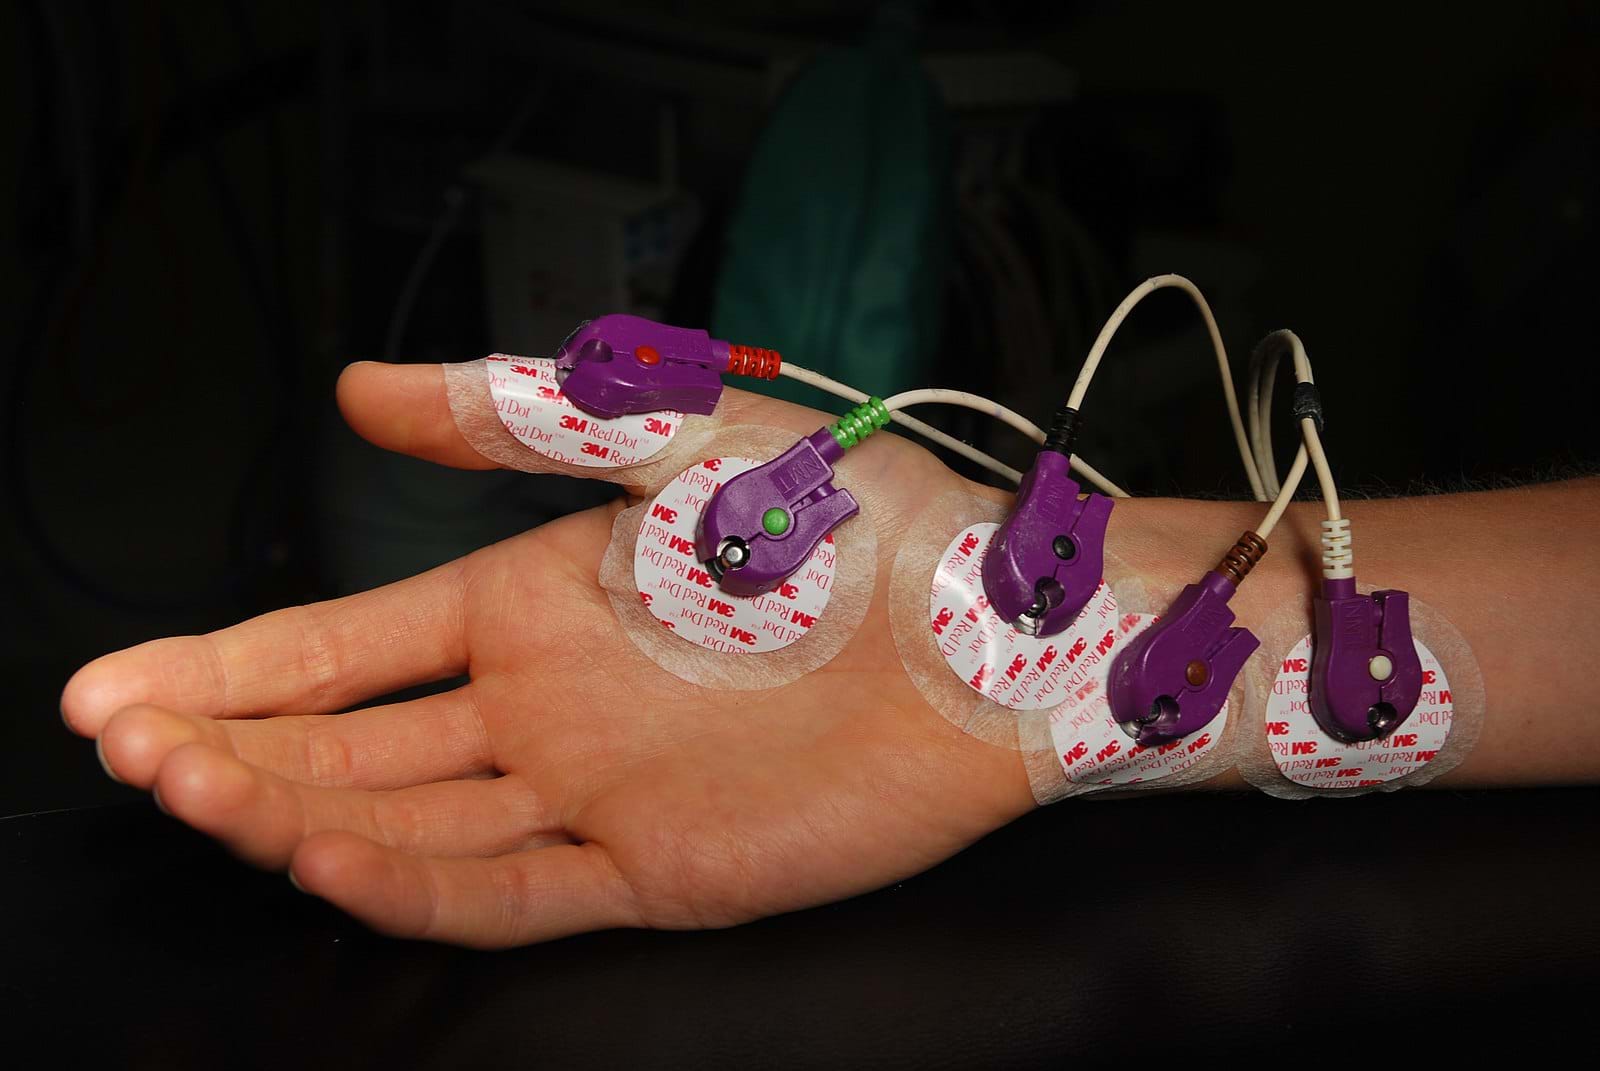 A photo of a hand with medical sensors attached to the thumb, palm, and wrist. Wires from the sensors lead to a medical device.  